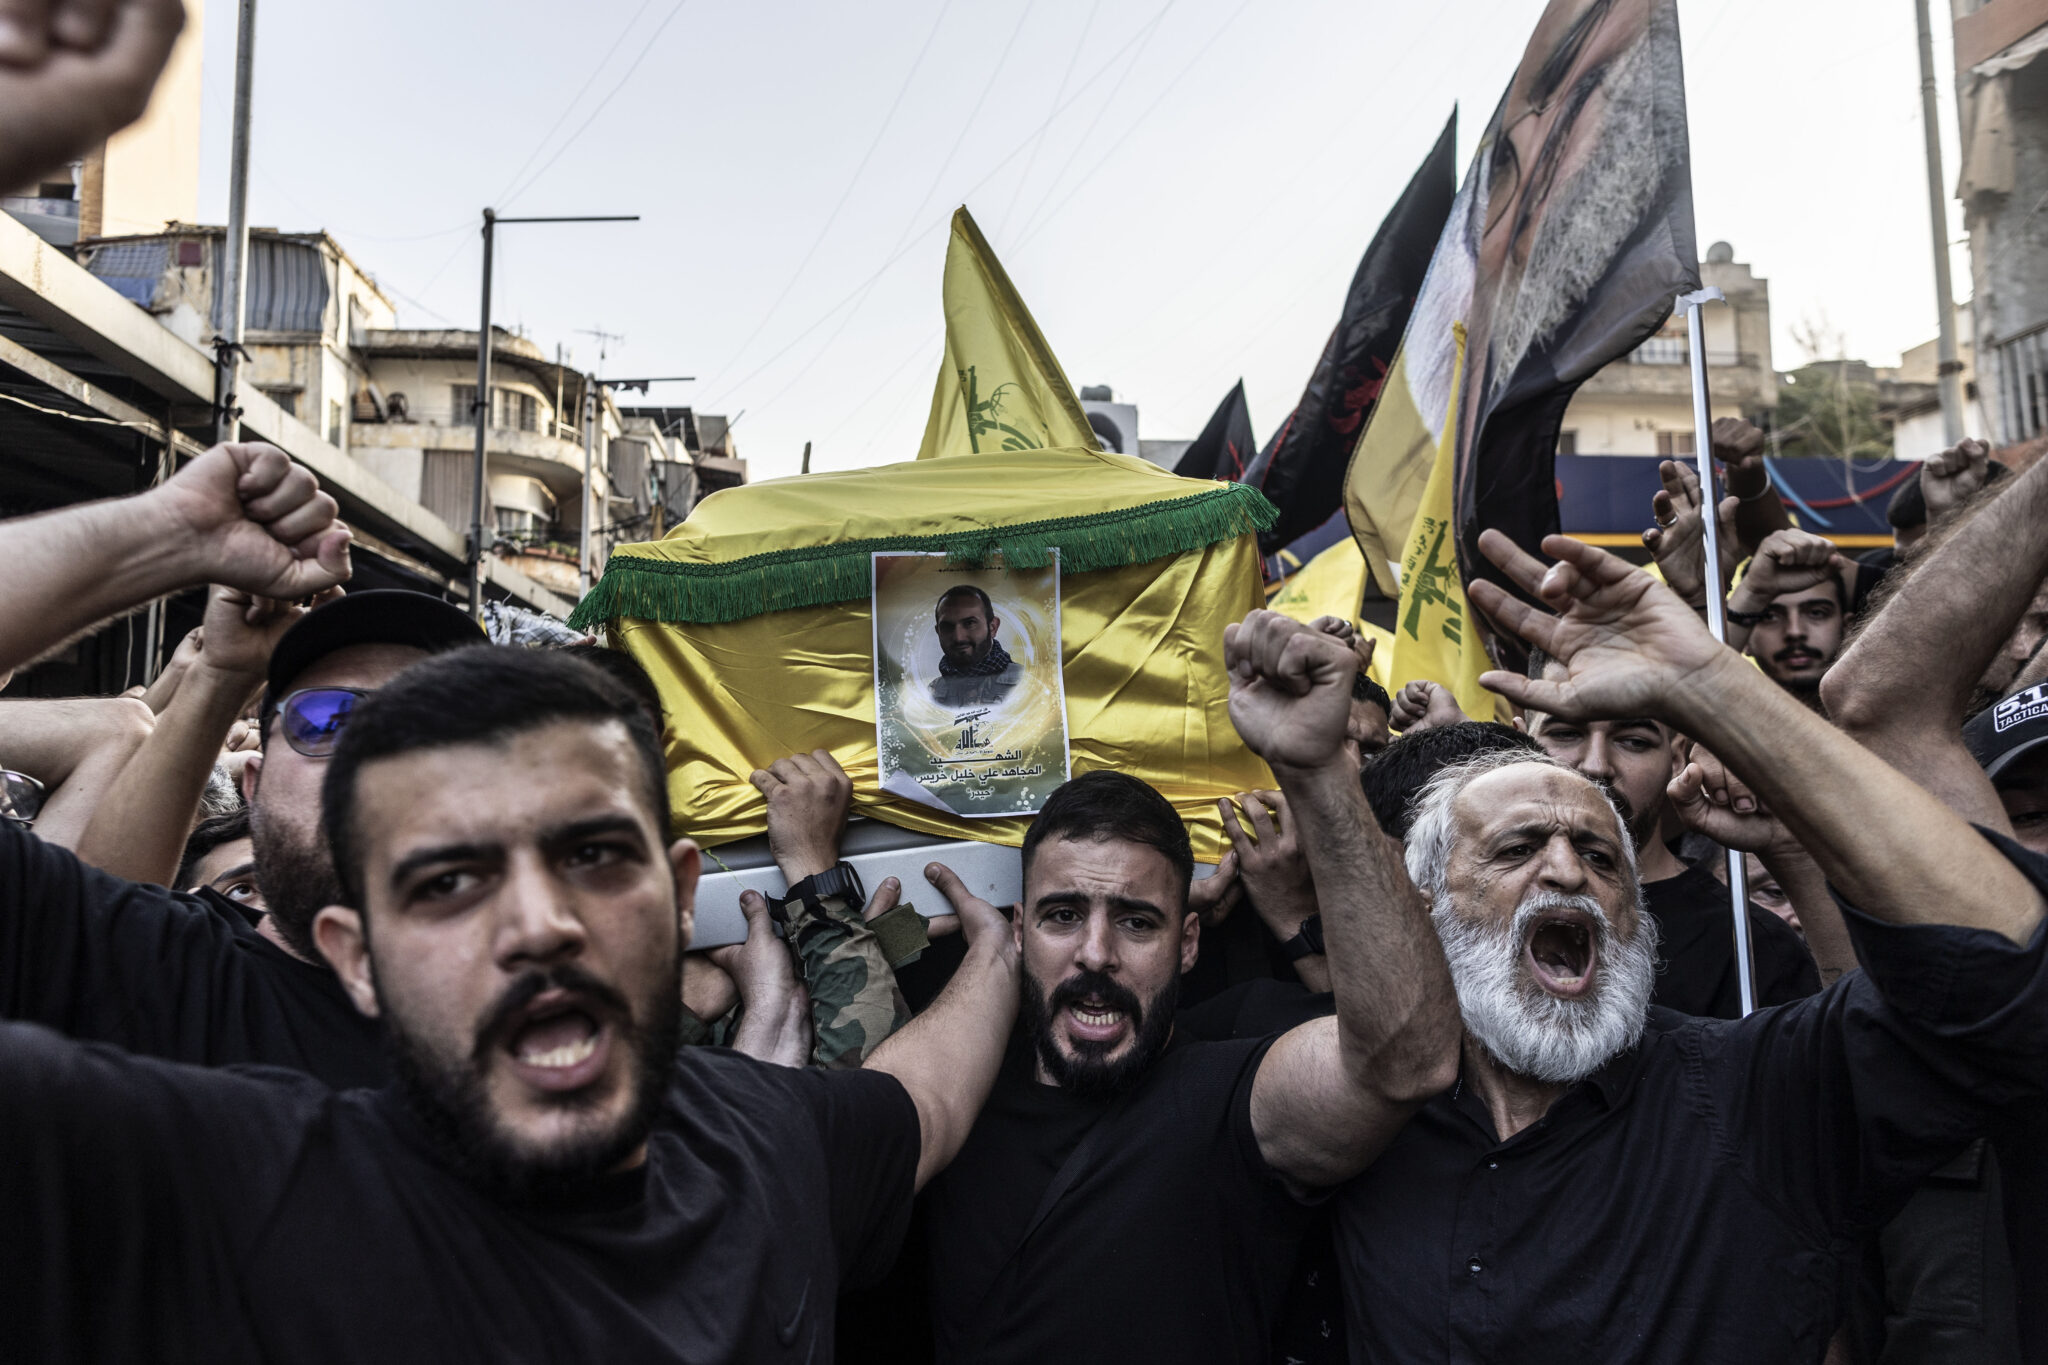 What Happens if Hezbollah Makes Good on its Vow to Escalate Violence in the Middle East?